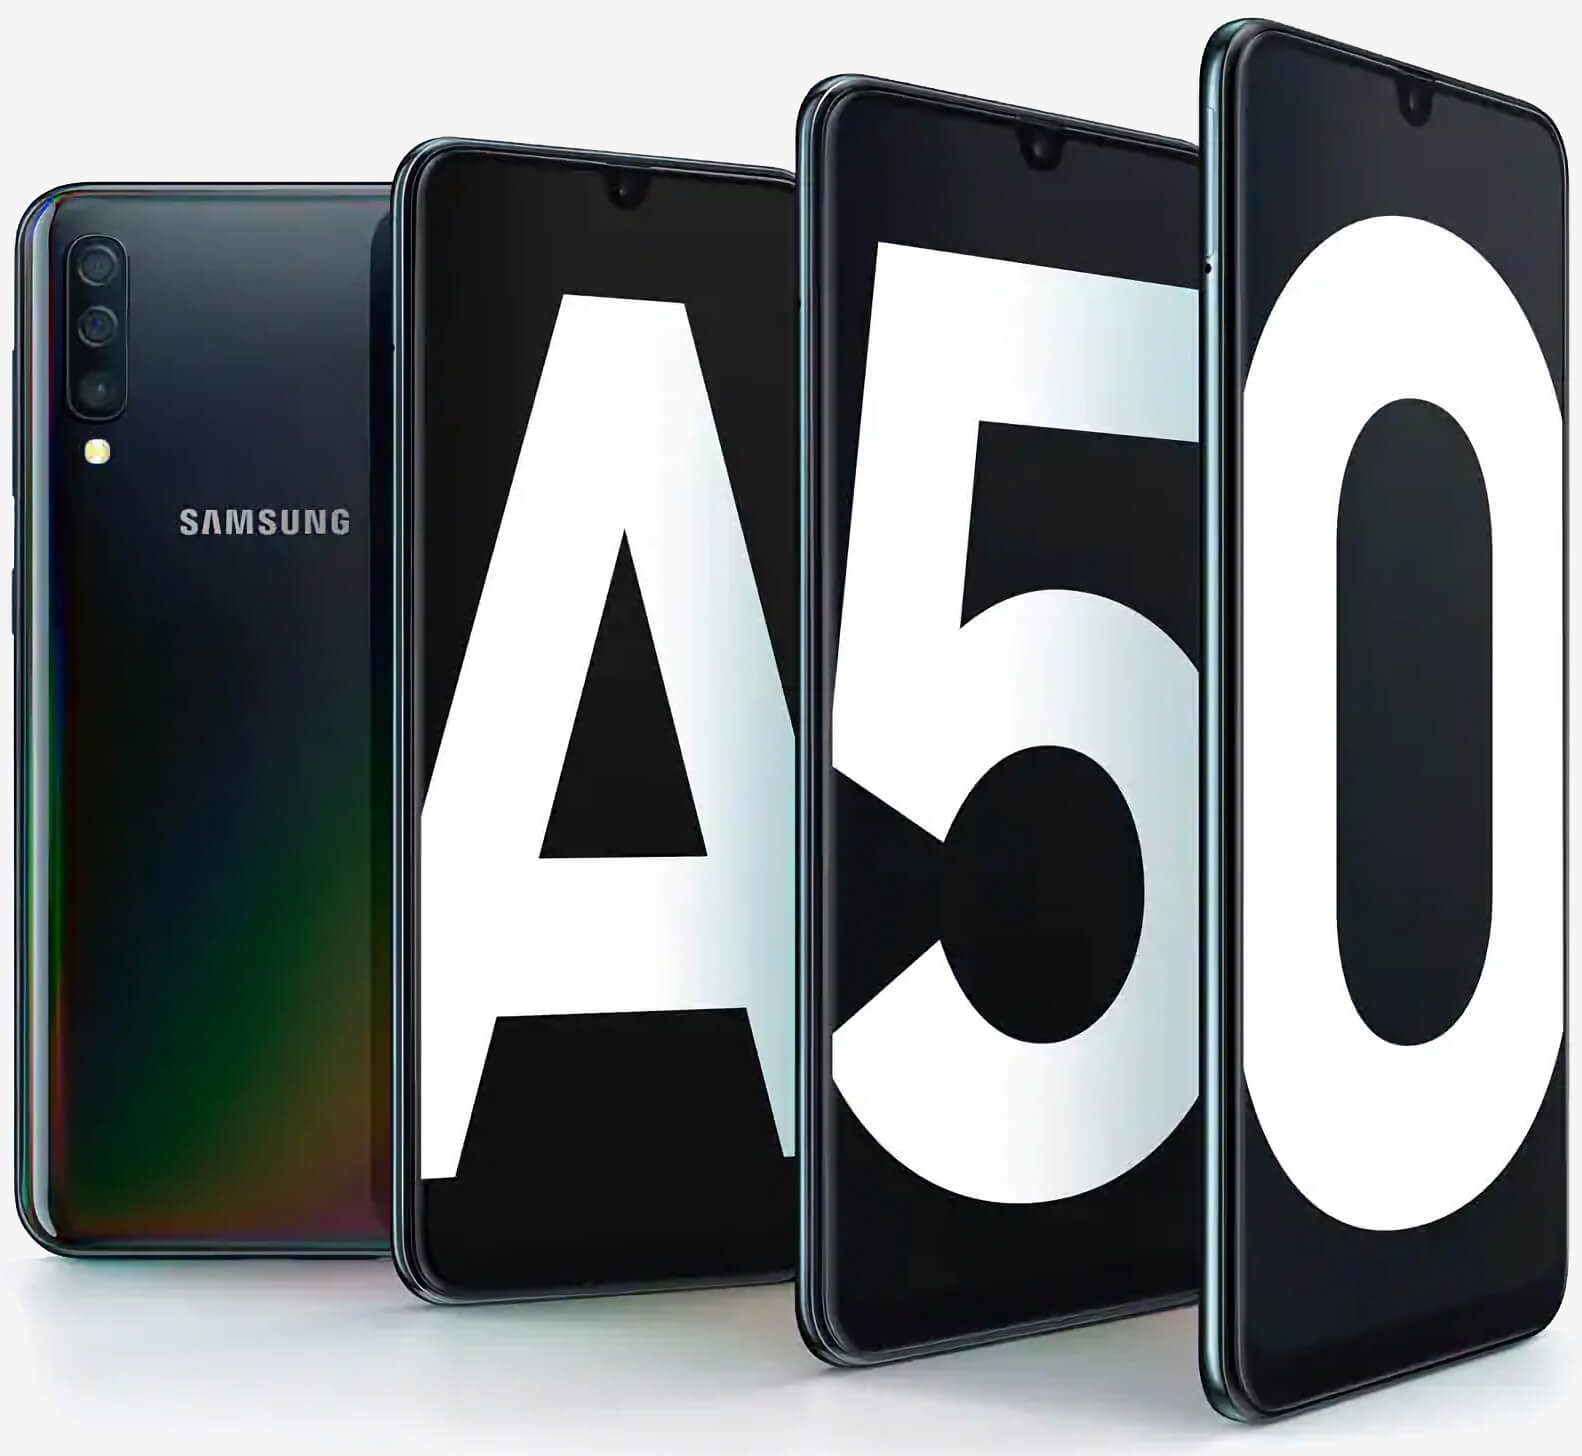 Samsung's $350 Galaxy A50 smartphone arrives in the US on June 13